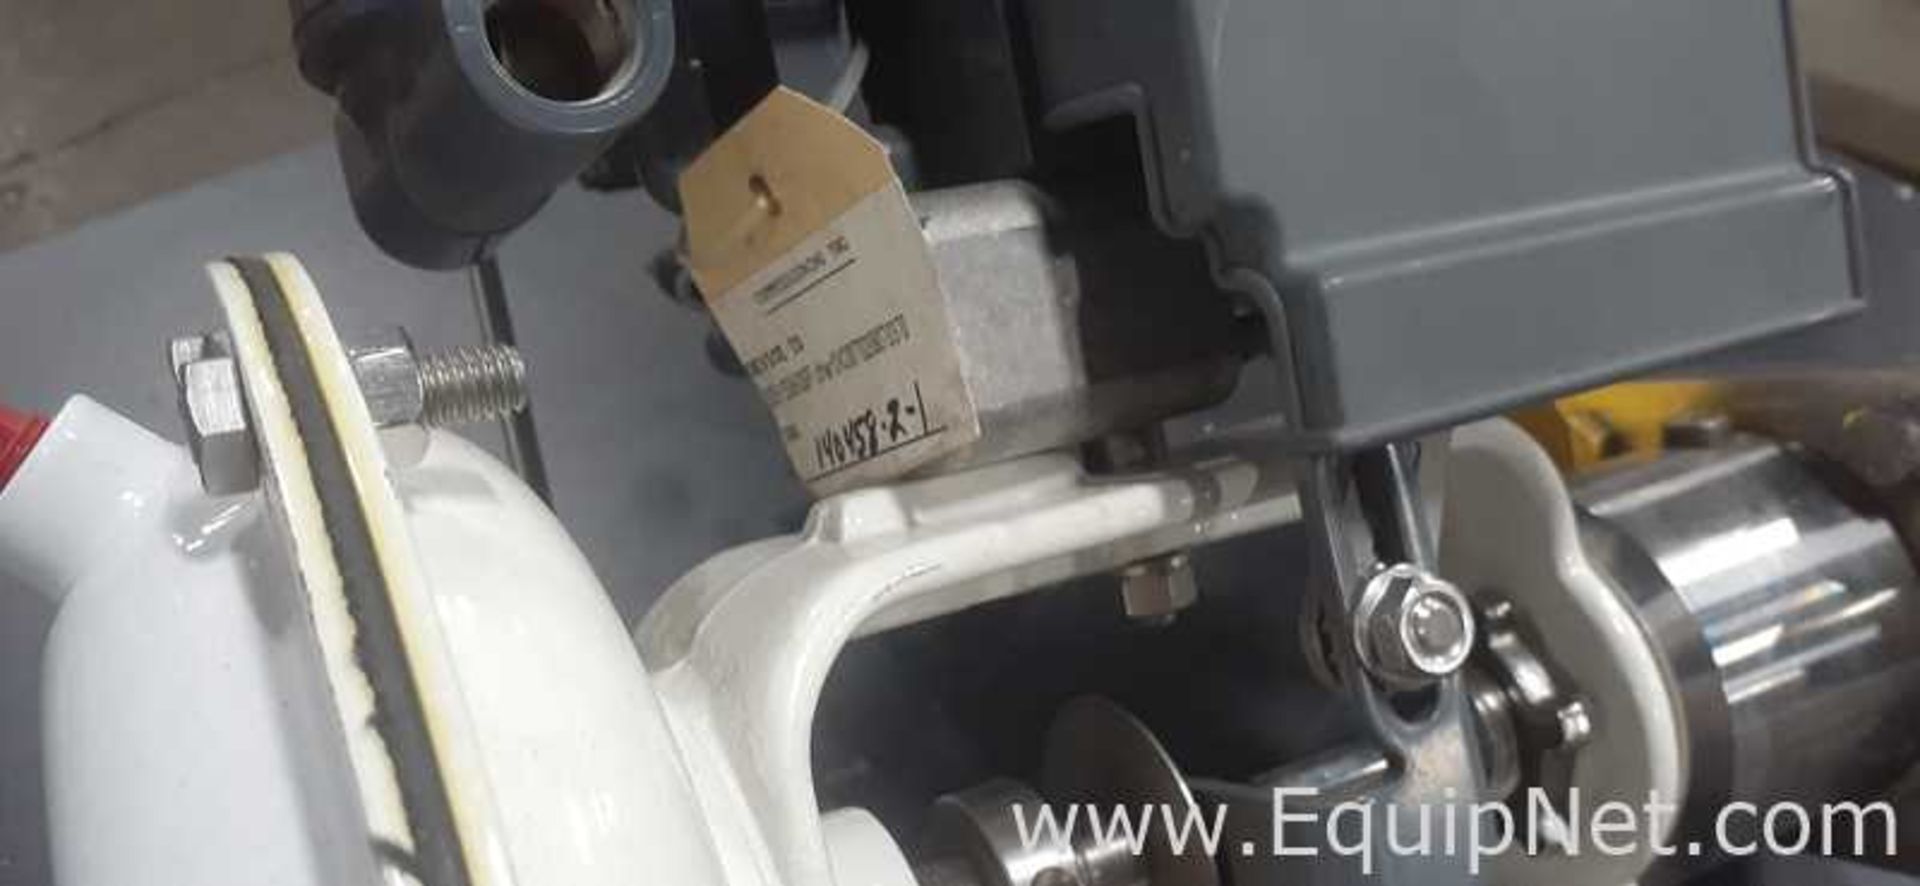 Fieldvue Digital Valve Controller with 1in. Sanitary Angle Control Valve - Image 3 of 11